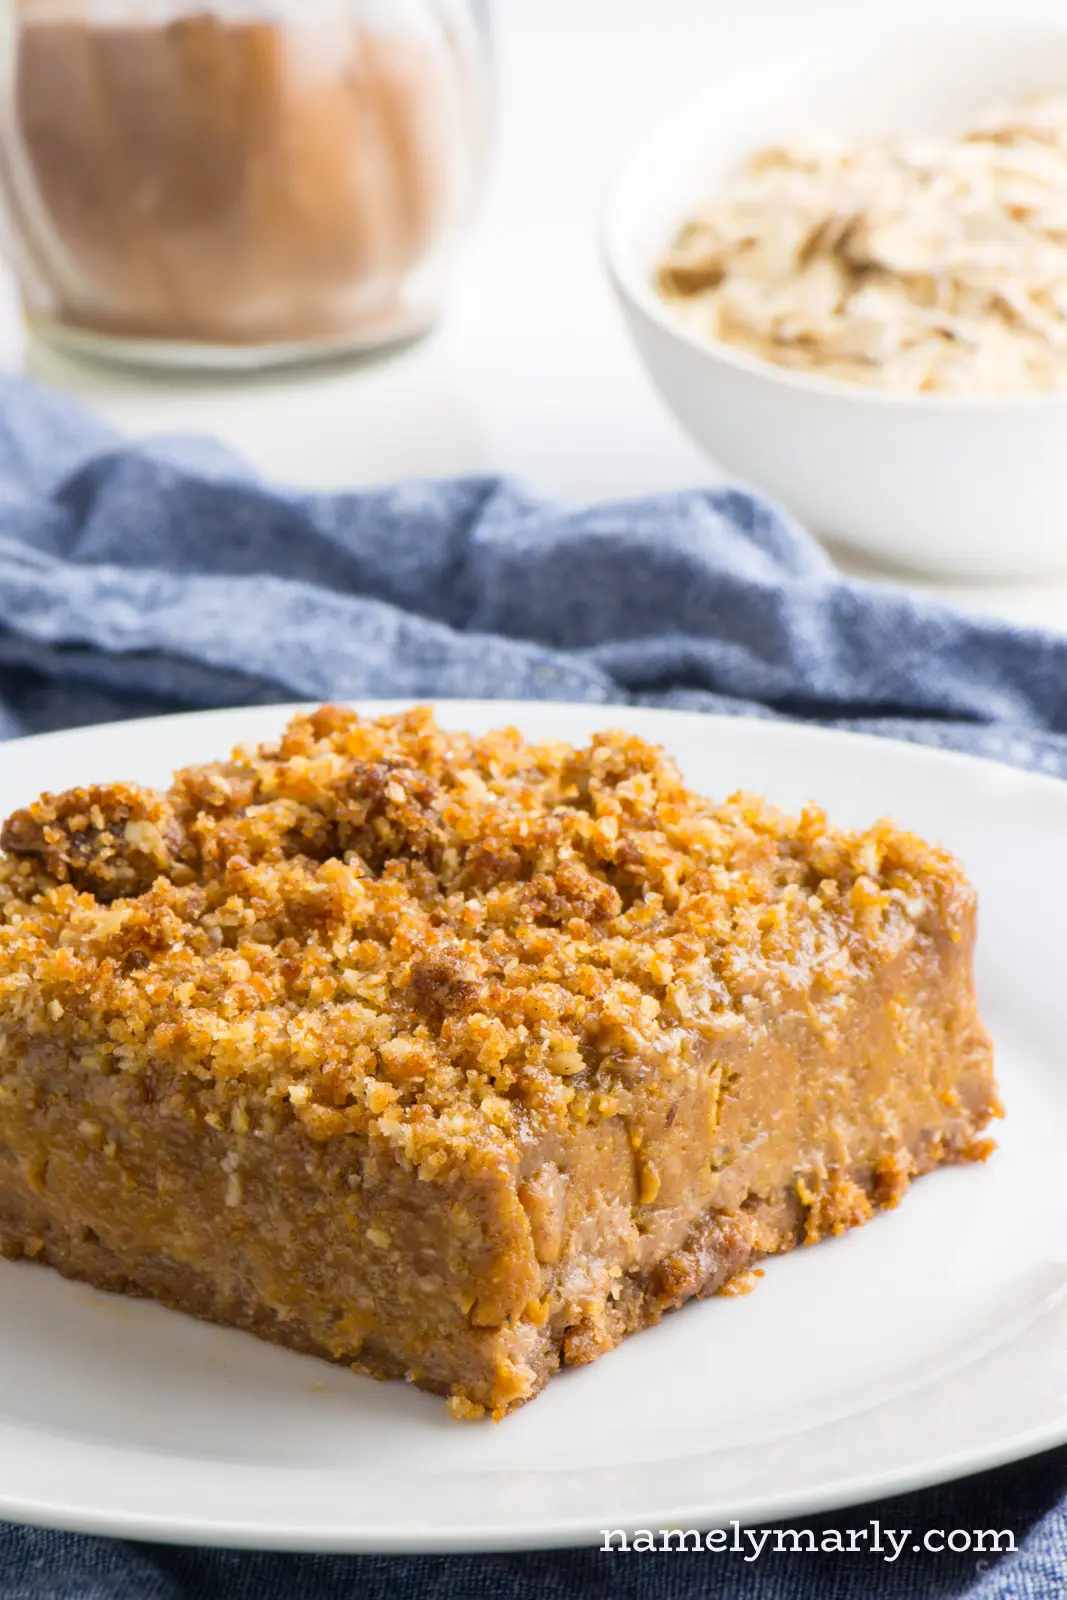 One slice of these vegan pumpkin pie bars sits on a plate with oatmeal and spices behind it.